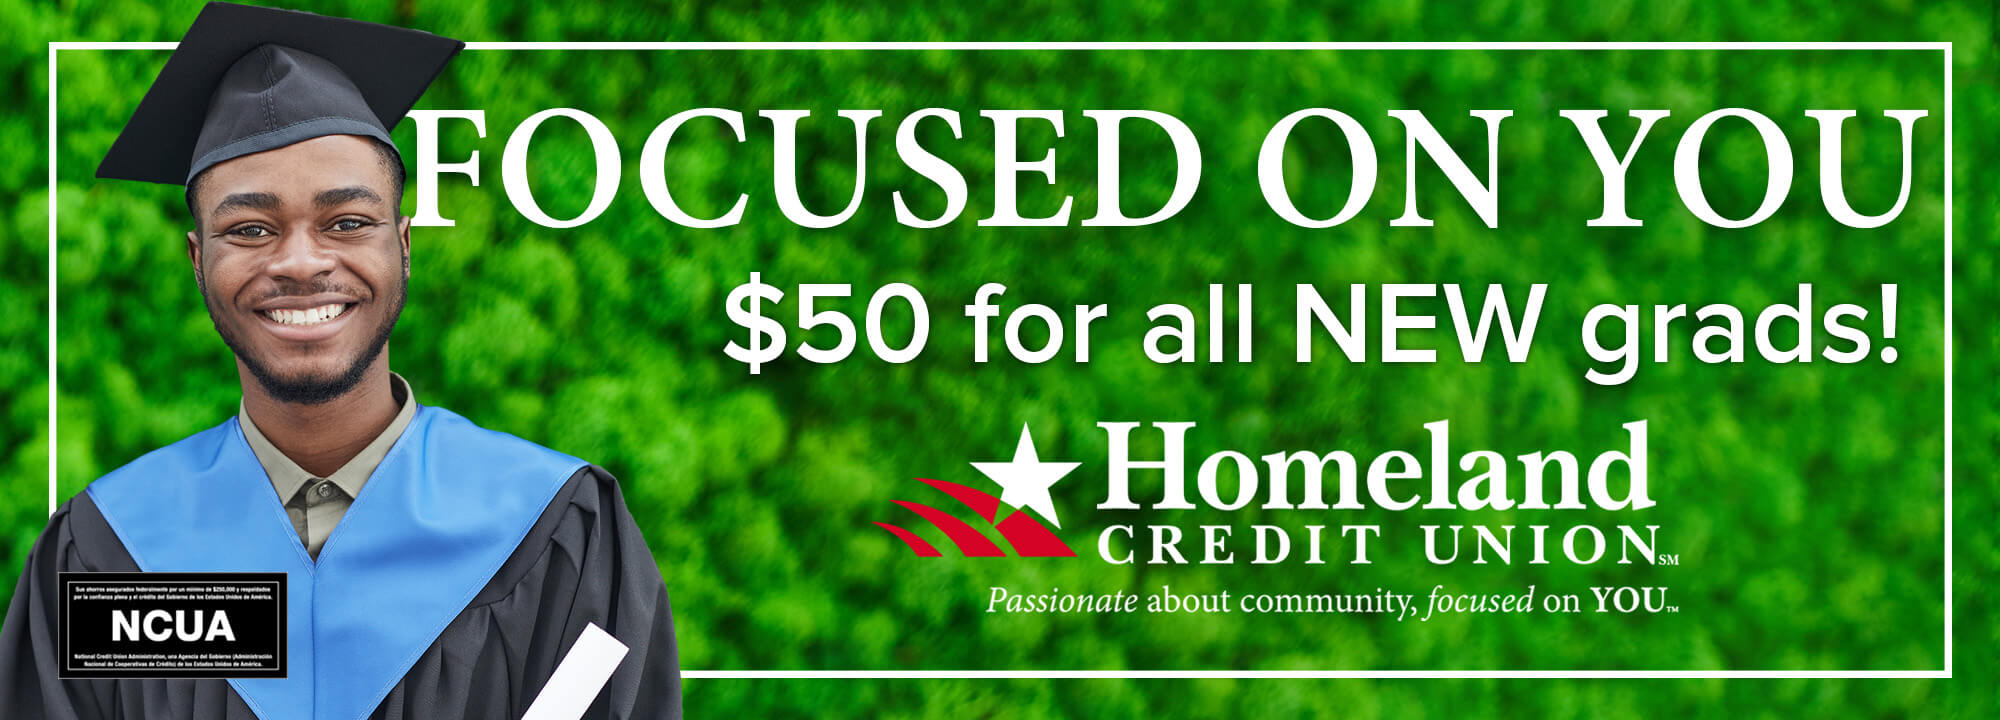 Focused on you! $50 for all new grads. Homeland Credit Union. $50 for all new grads! Click to learn more.